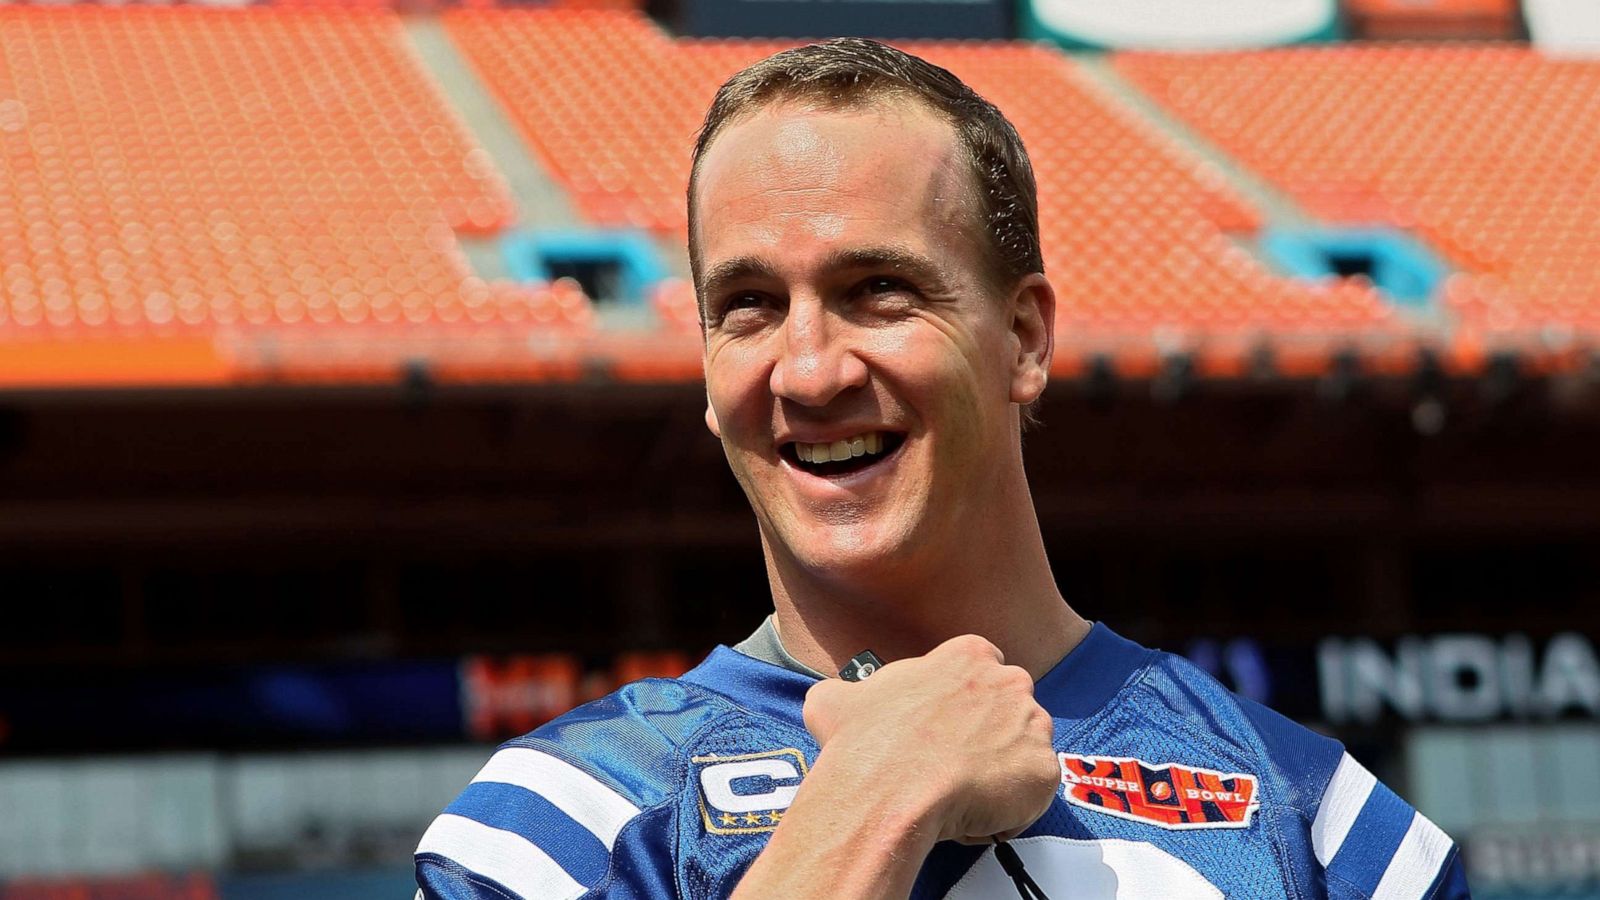 Peyton Manning expressed his respect for Tom Brady after Denver